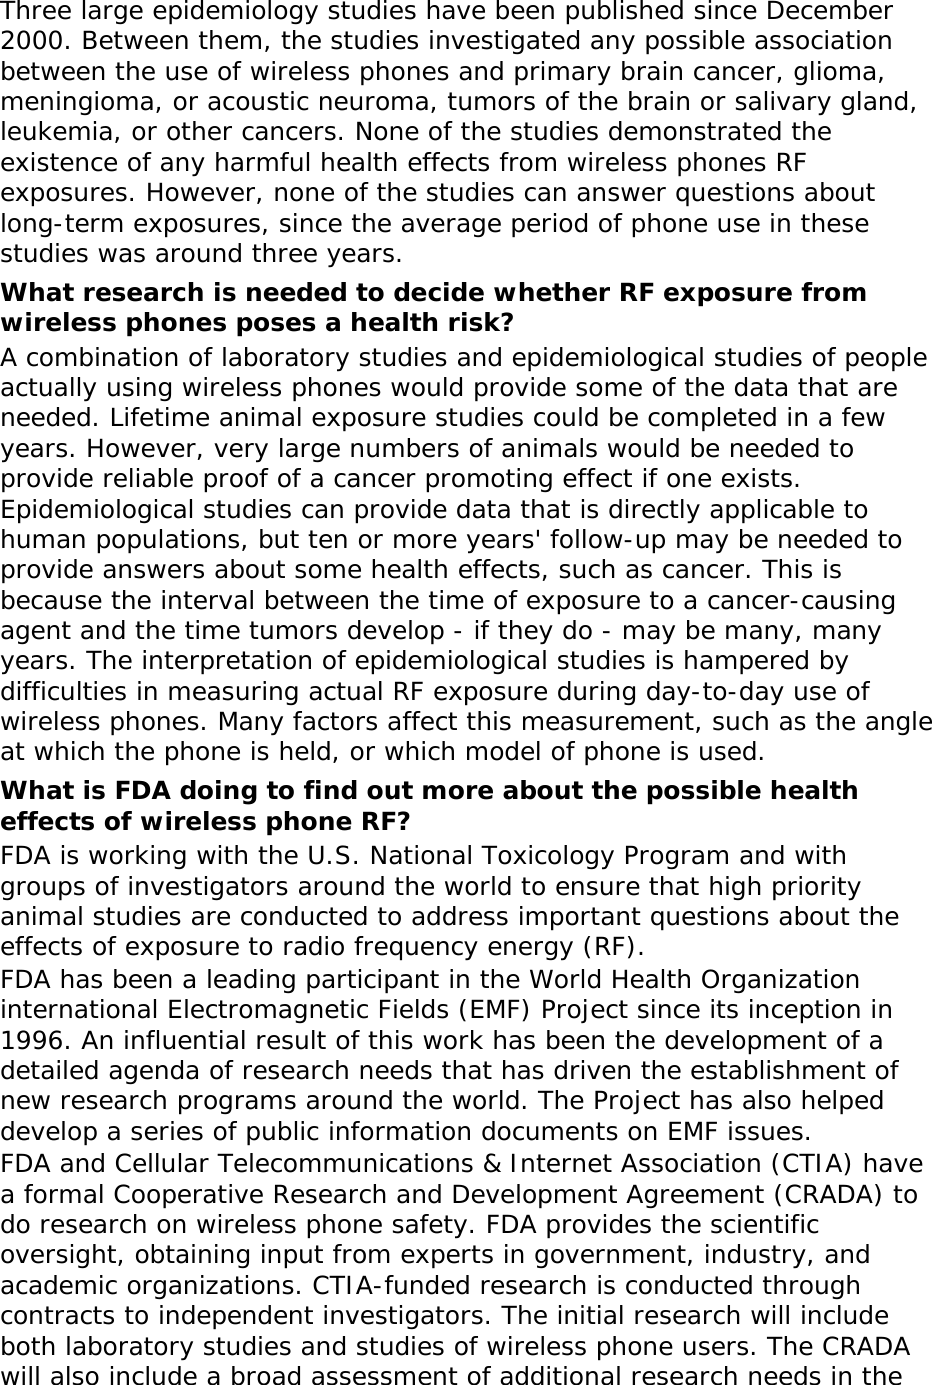 Three large epidemiology studies have been published since December 2000. Between them, the studies investigated any possible association between the use of wireless phones and primary brain cancer, glioma, meningioma, or acoustic neuroma, tumors of the brain or salivary gland, leukemia, or other cancers. None of the studies demonstrated the existence of any harmful health effects from wireless phones RF exposures. However, none of the studies can answer questions about long-term exposures, since the average period of phone use in these studies was around three years. What research is needed to decide whether RF exposure from wireless phones poses a health risk? A combination of laboratory studies and epidemiological studies of people actually using wireless phones would provide some of the data that are needed. Lifetime animal exposure studies could be completed in a few years. However, very large numbers of animals would be needed to provide reliable proof of a cancer promoting effect if one exists. Epidemiological studies can provide data that is directly applicable to human populations, but ten or more years&apos; follow-up may be needed to provide answers about some health effects, such as cancer. This is because the interval between the time of exposure to a cancer-causing agent and the time tumors develop - if they do - may be many, many years. The interpretation of epidemiological studies is hampered by difficulties in measuring actual RF exposure during day-to-day use of wireless phones. Many factors affect this measurement, such as the angle at which the phone is held, or which model of phone is used. What is FDA doing to find out more about the possible health effects of wireless phone RF? FDA is working with the U.S. National Toxicology Program and with groups of investigators around the world to ensure that high priority animal studies are conducted to address important questions about the effects of exposure to radio frequency energy (RF). FDA has been a leading participant in the World Health Organization international Electromagnetic Fields (EMF) Project since its inception in 1996. An influential result of this work has been the development of a detailed agenda of research needs that has driven the establishment of new research programs around the world. The Project has also helped develop a series of public information documents on EMF issues. FDA and Cellular Telecommunications &amp; Internet Association (CTIA) have a formal Cooperative Research and Development Agreement (CRADA) to do research on wireless phone safety. FDA provides the scientific oversight, obtaining input from experts in government, industry, and academic organizations. CTIA-funded research is conducted through contracts to independent investigators. The initial research will include both laboratory studies and studies of wireless phone users. The CRADA will also include a broad assessment of additional research needs in the 